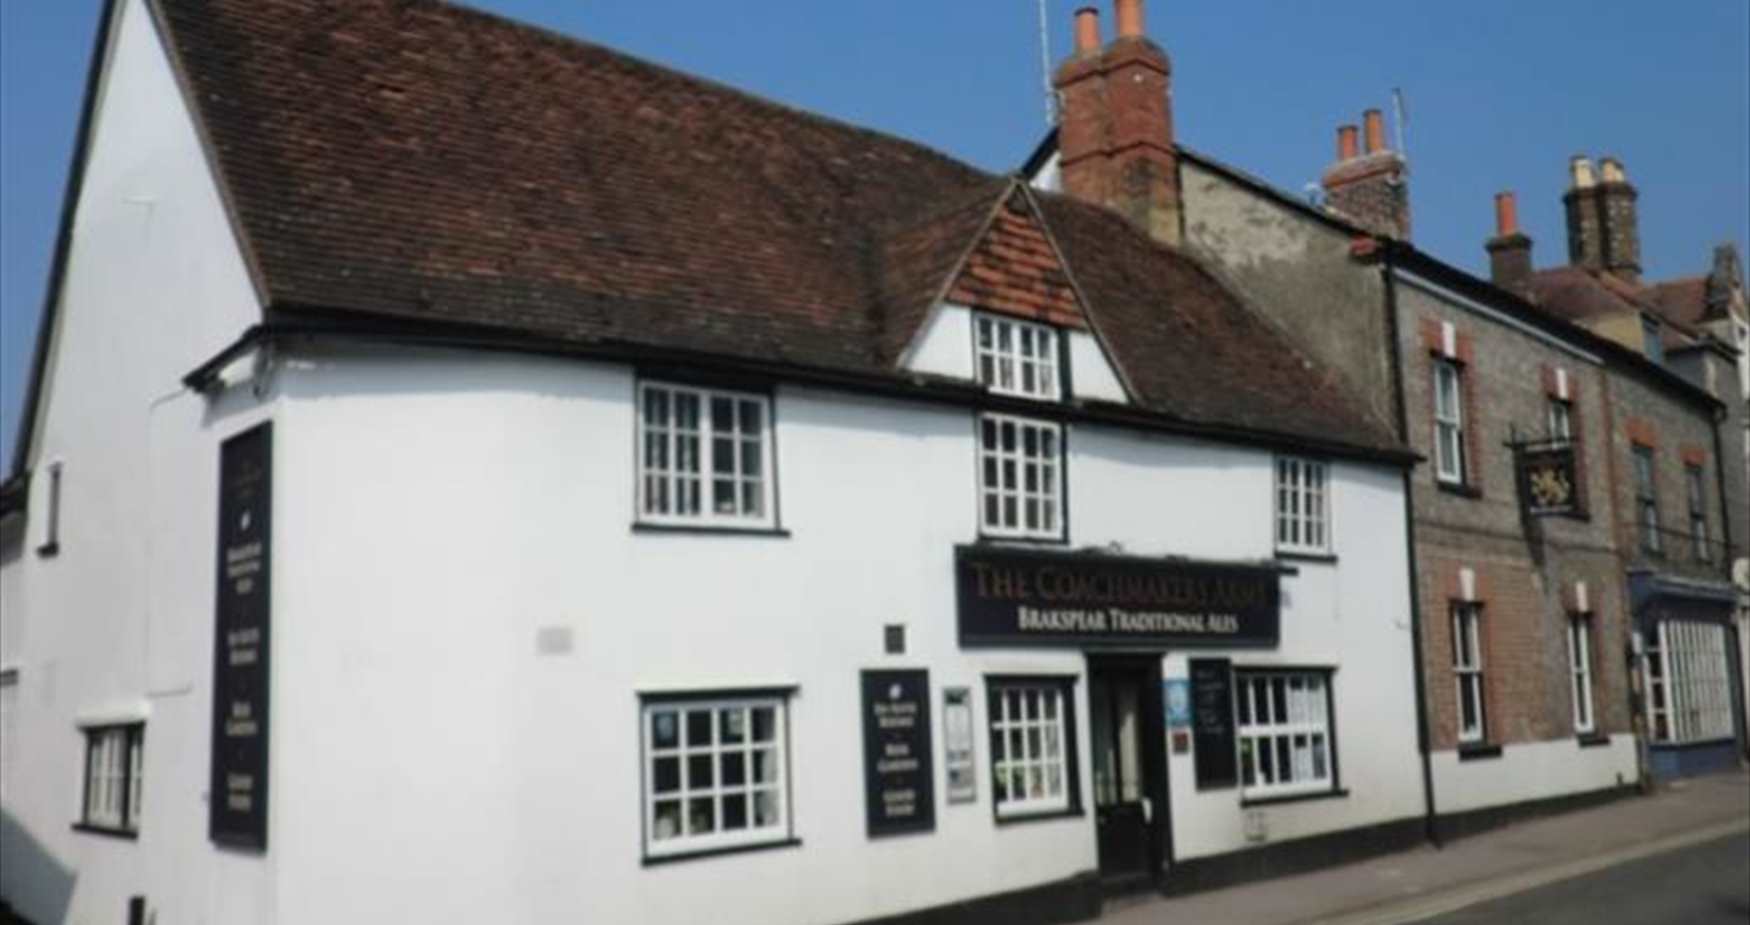 The Coachmakers Arms